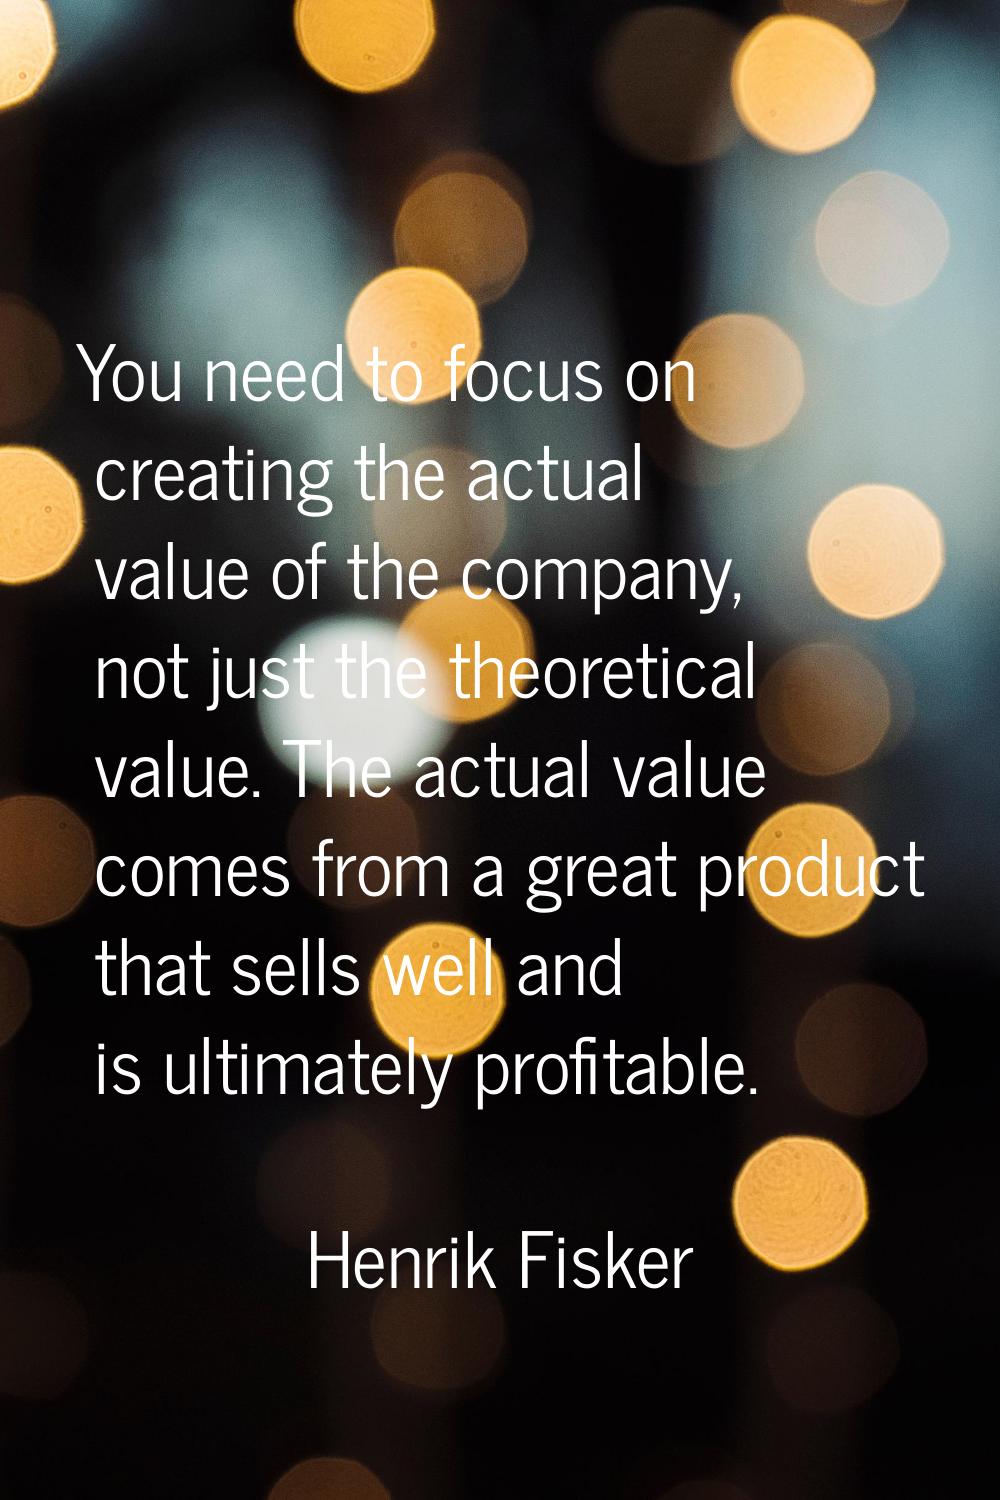 You need to focus on creating the actual value of the company, not just the theoretical value. The 